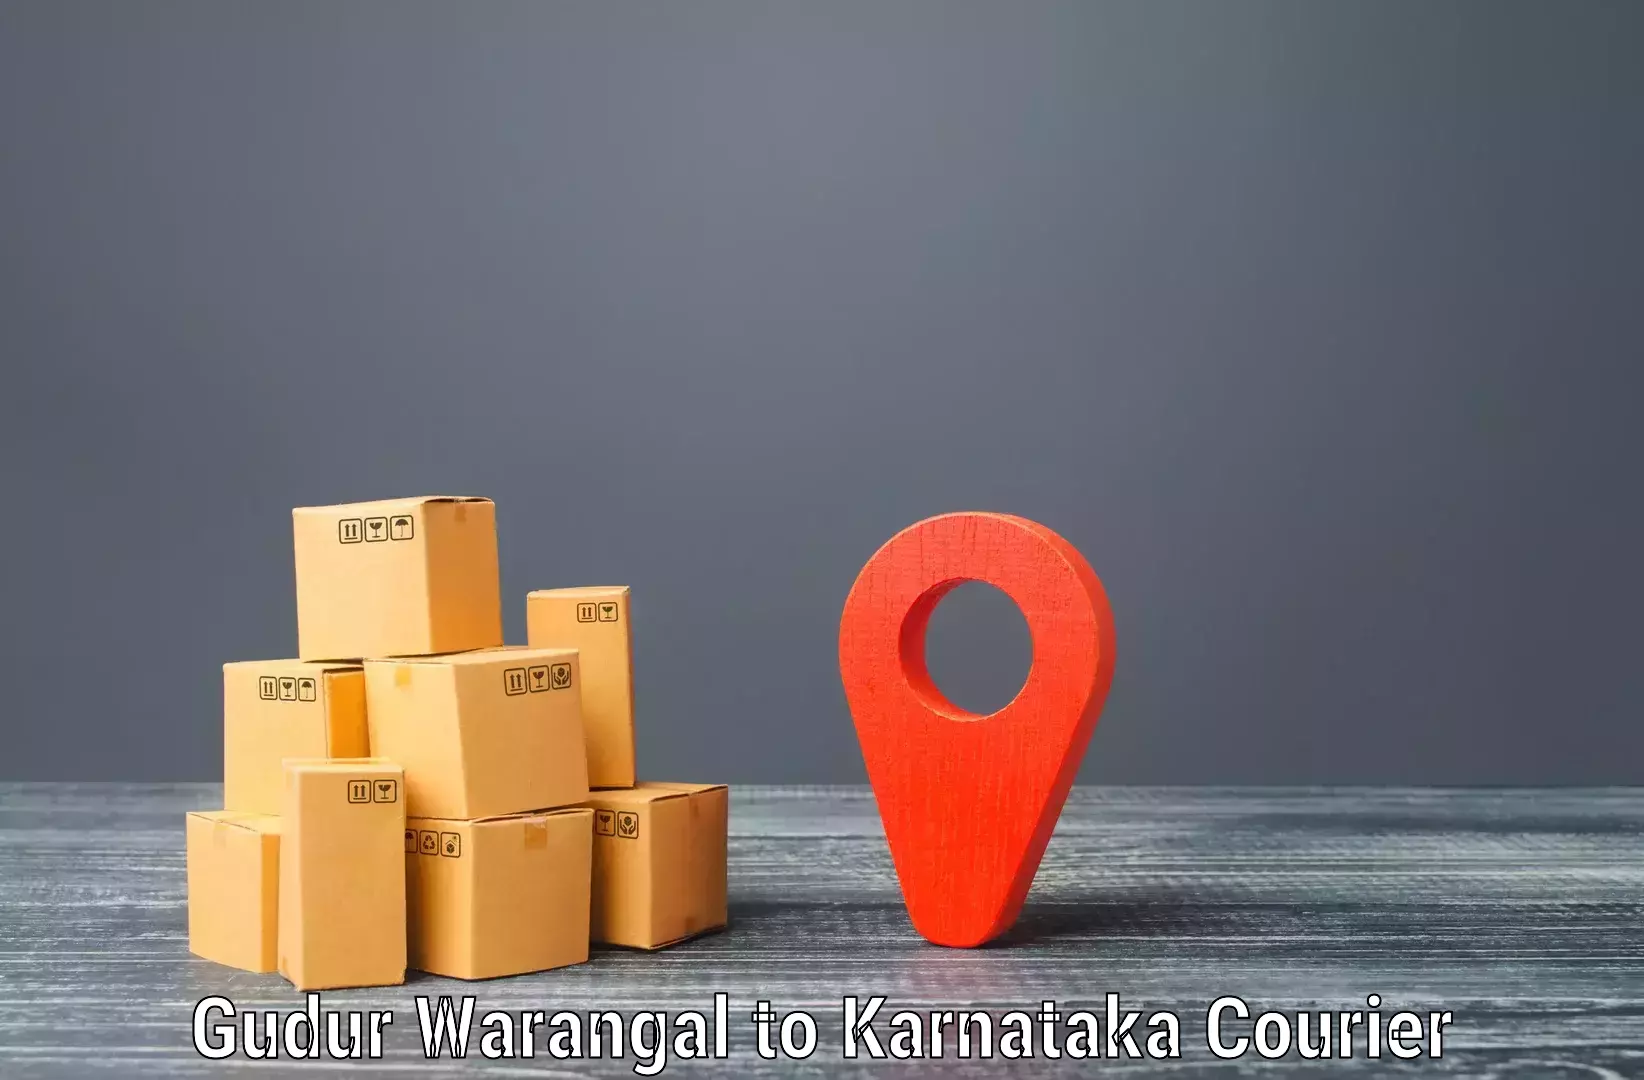 Expedited shipping solutions Gudur Warangal to Bhatkal